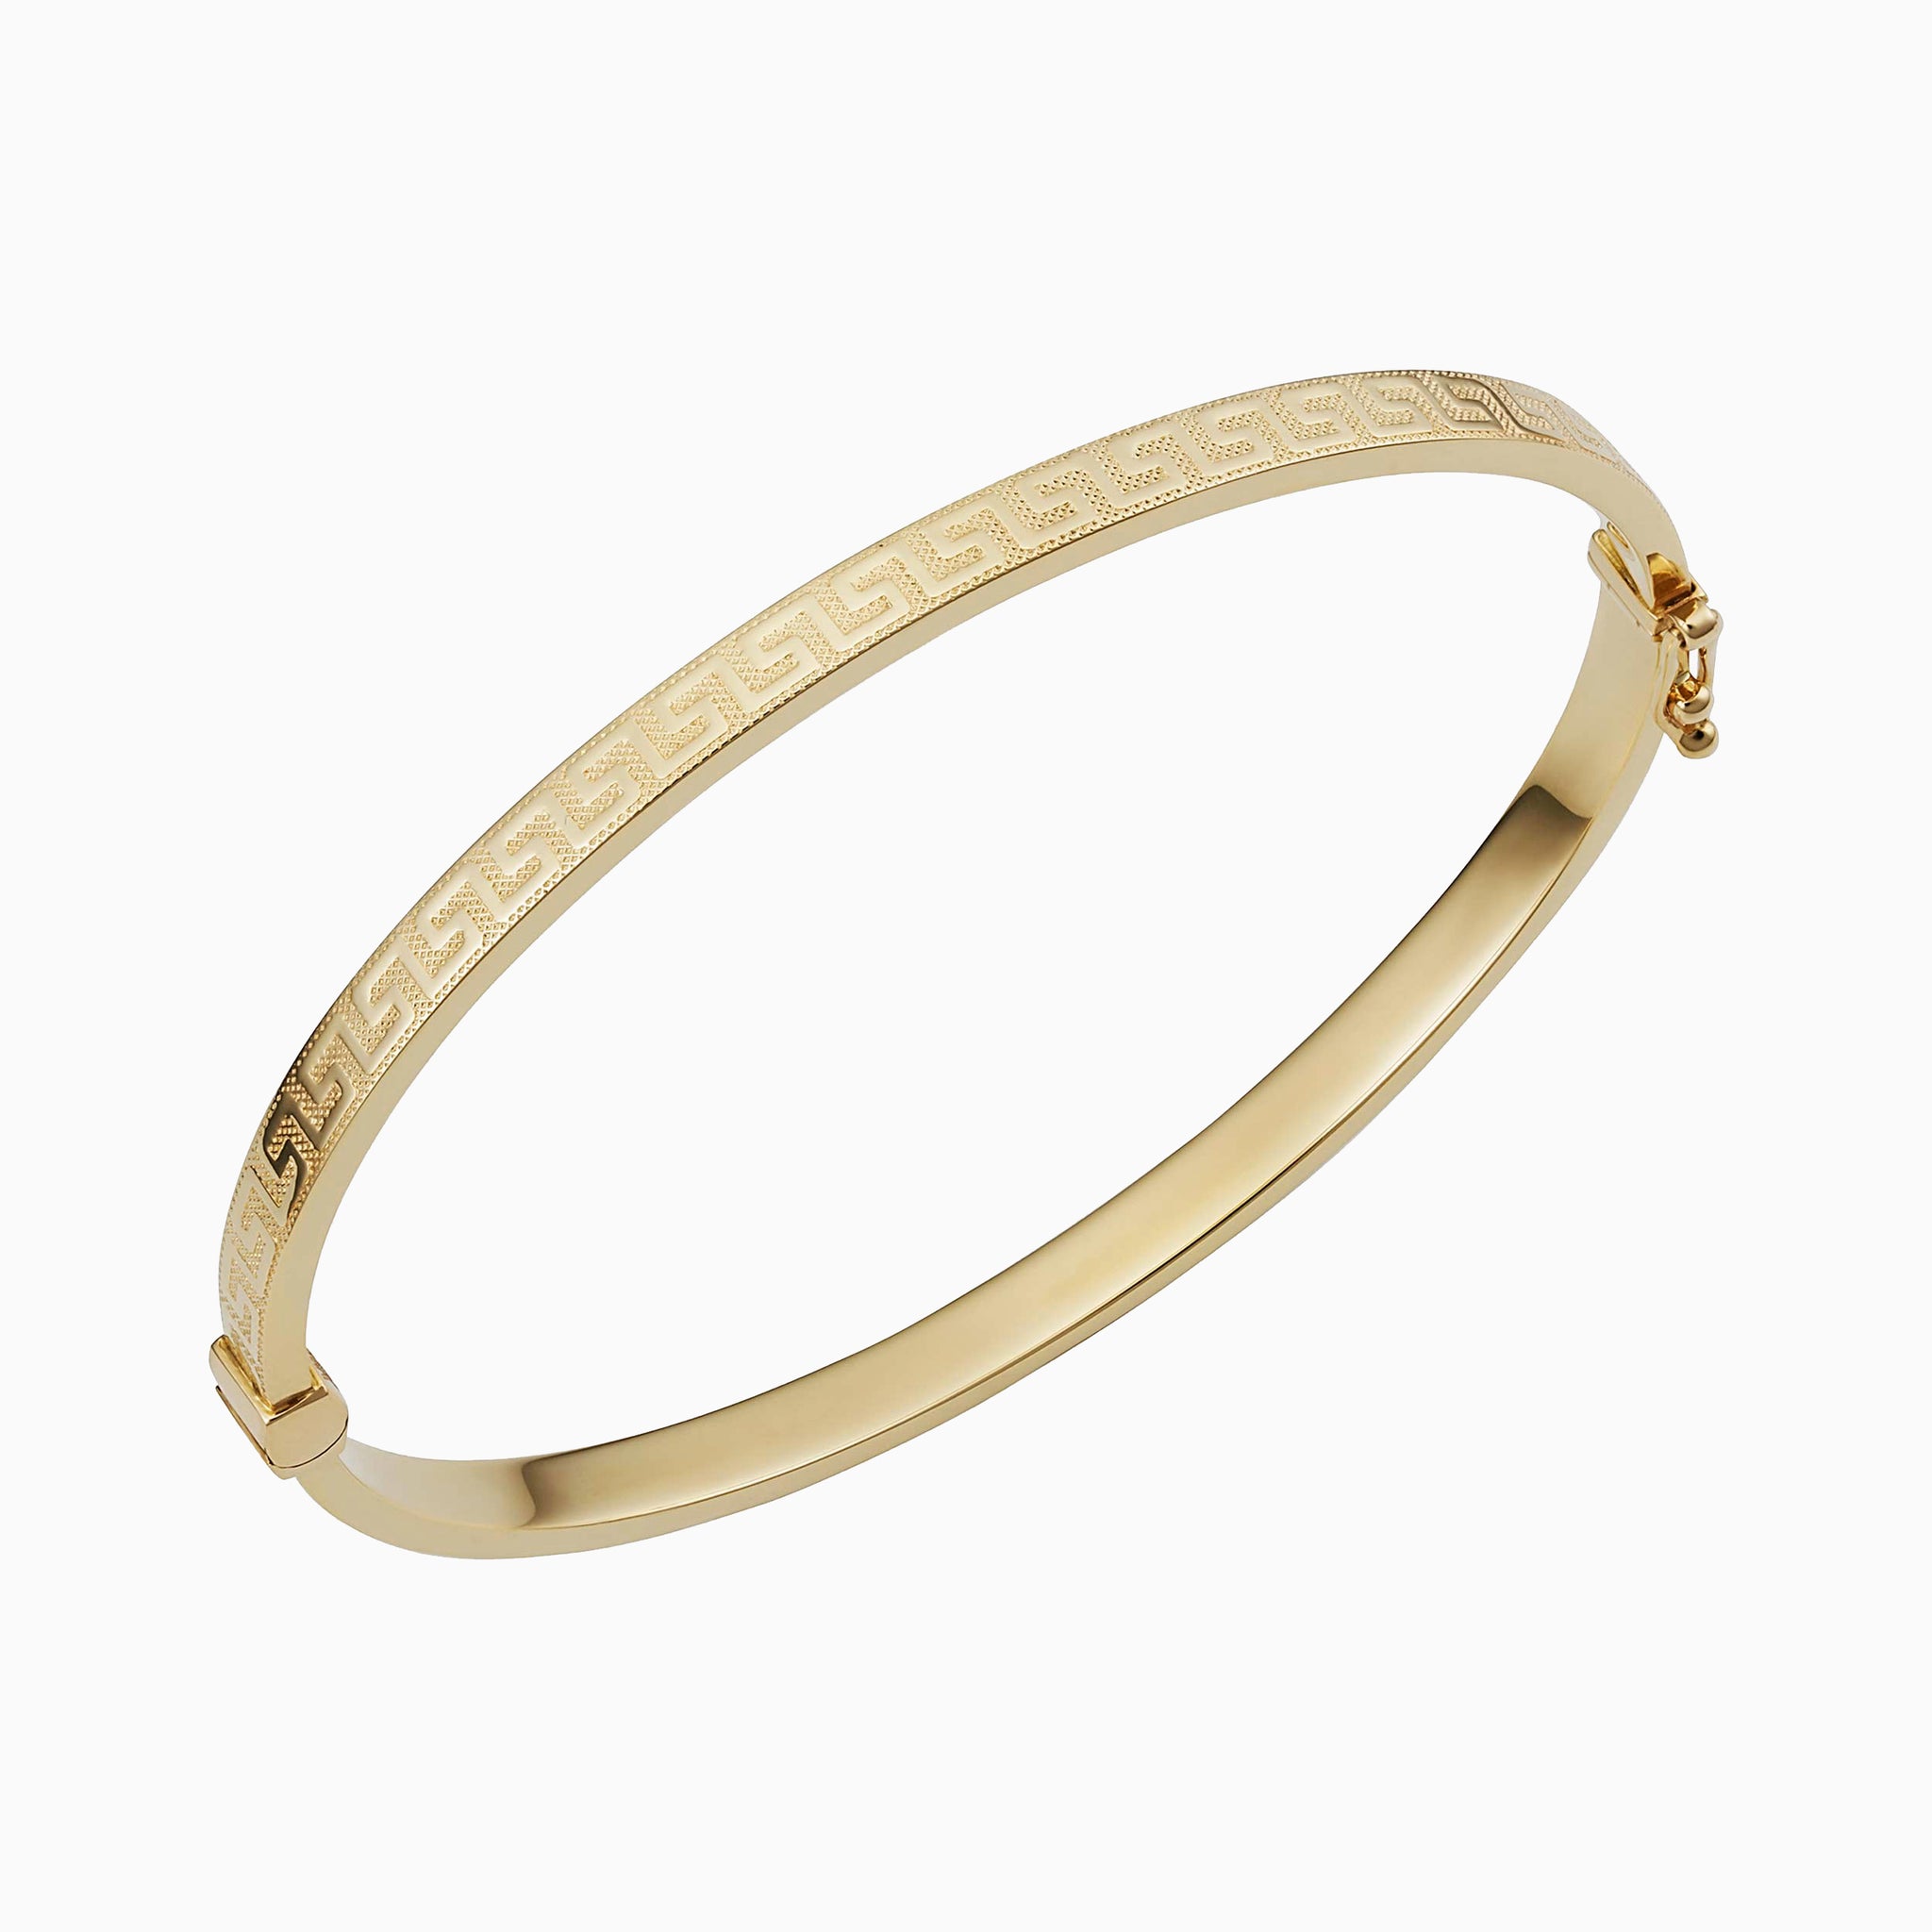 Shop Luxury-Inspired Bangle Bracelets for A High-end Look Gold